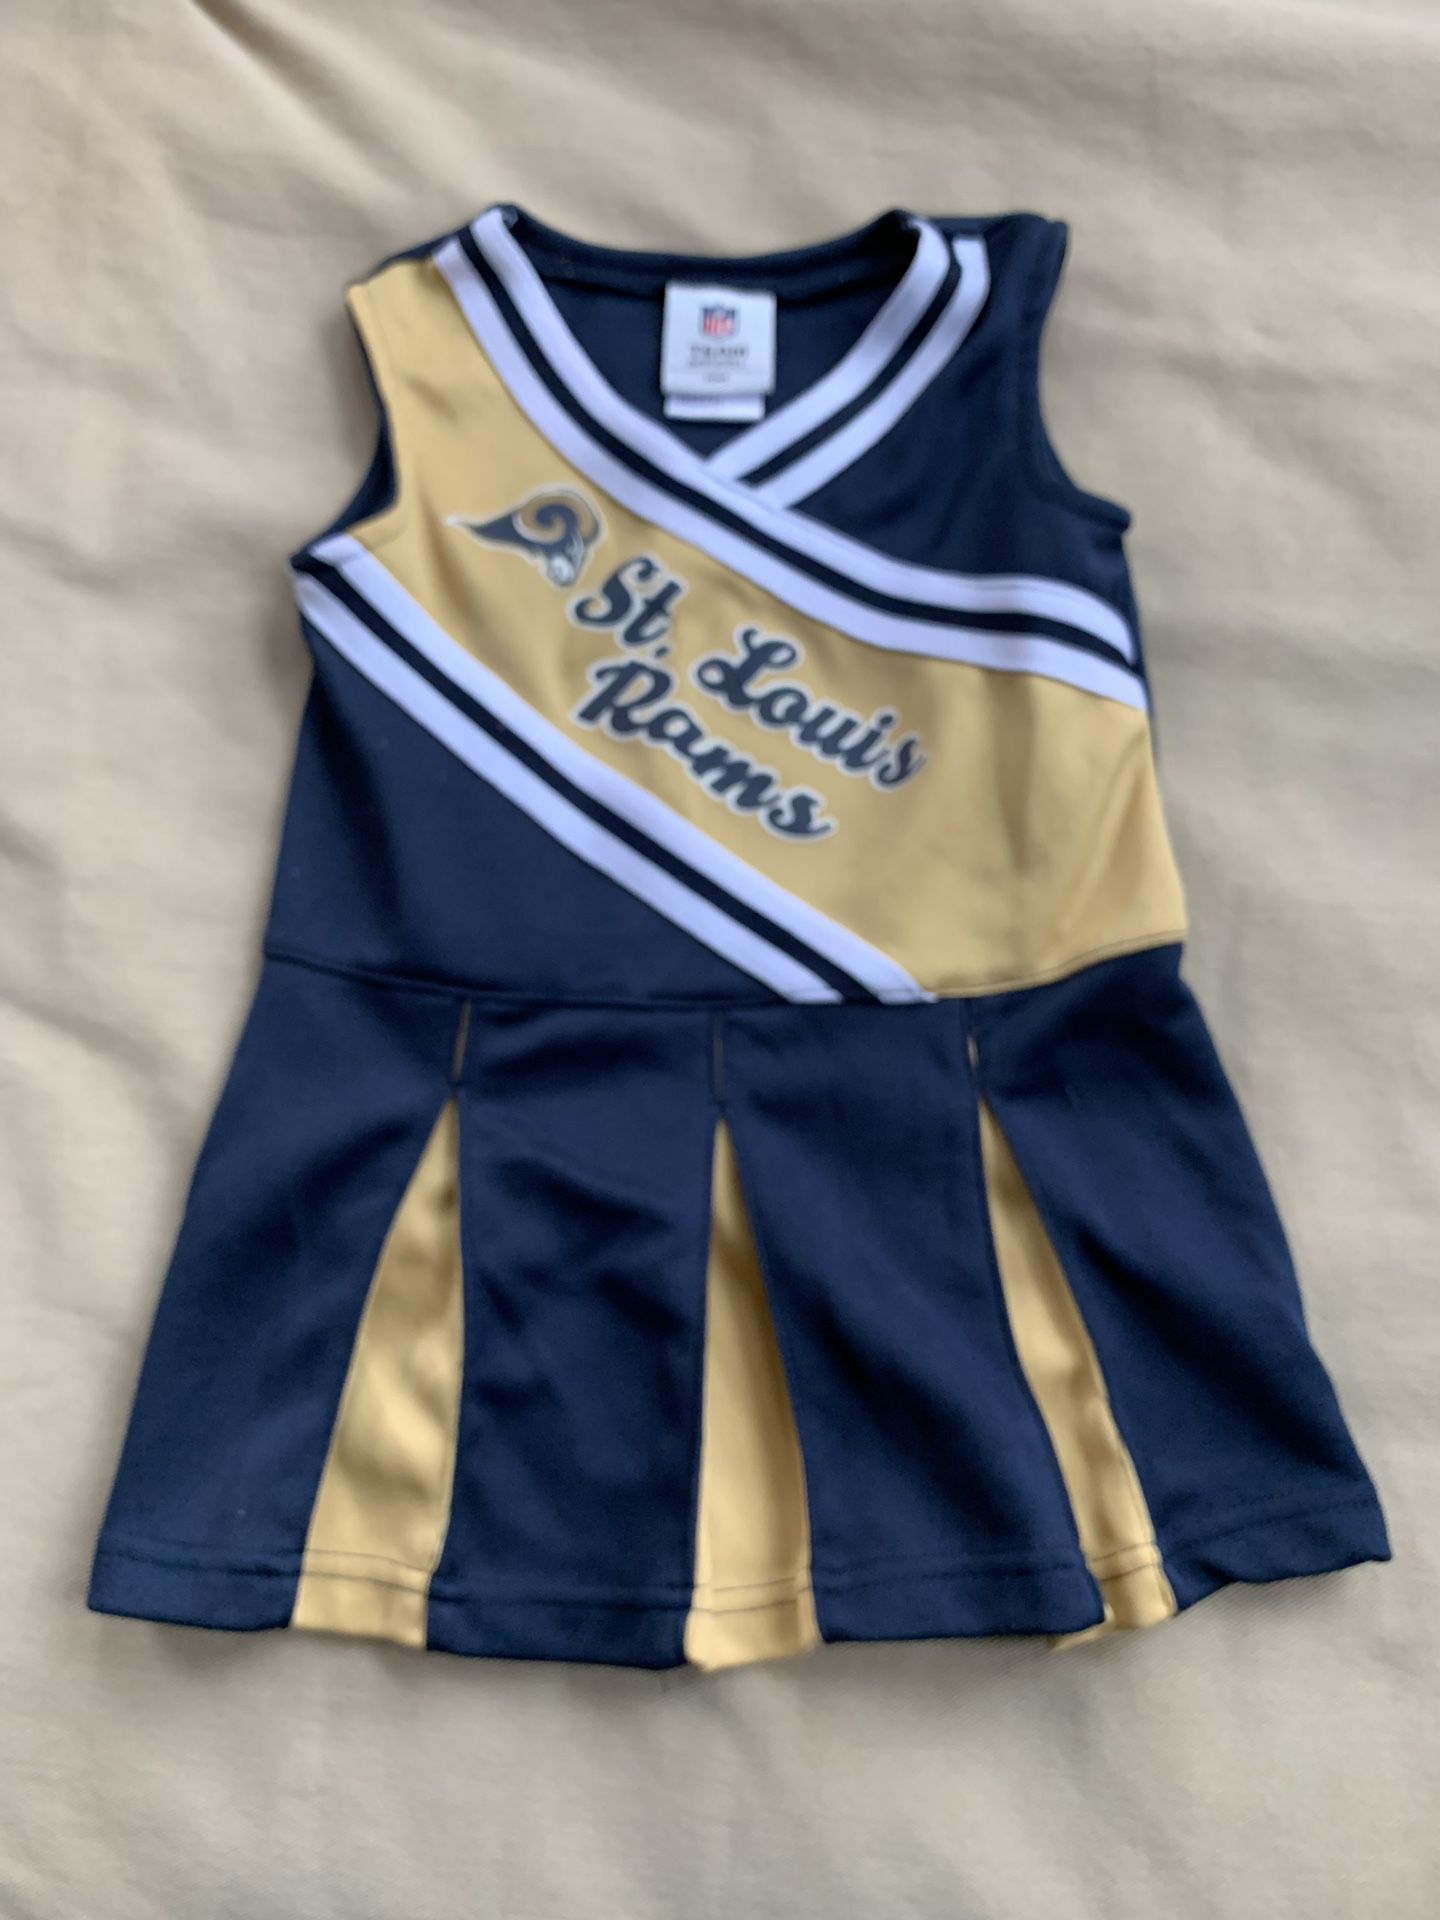 NFL Team Cheer Leader Dress, Navy and Gold